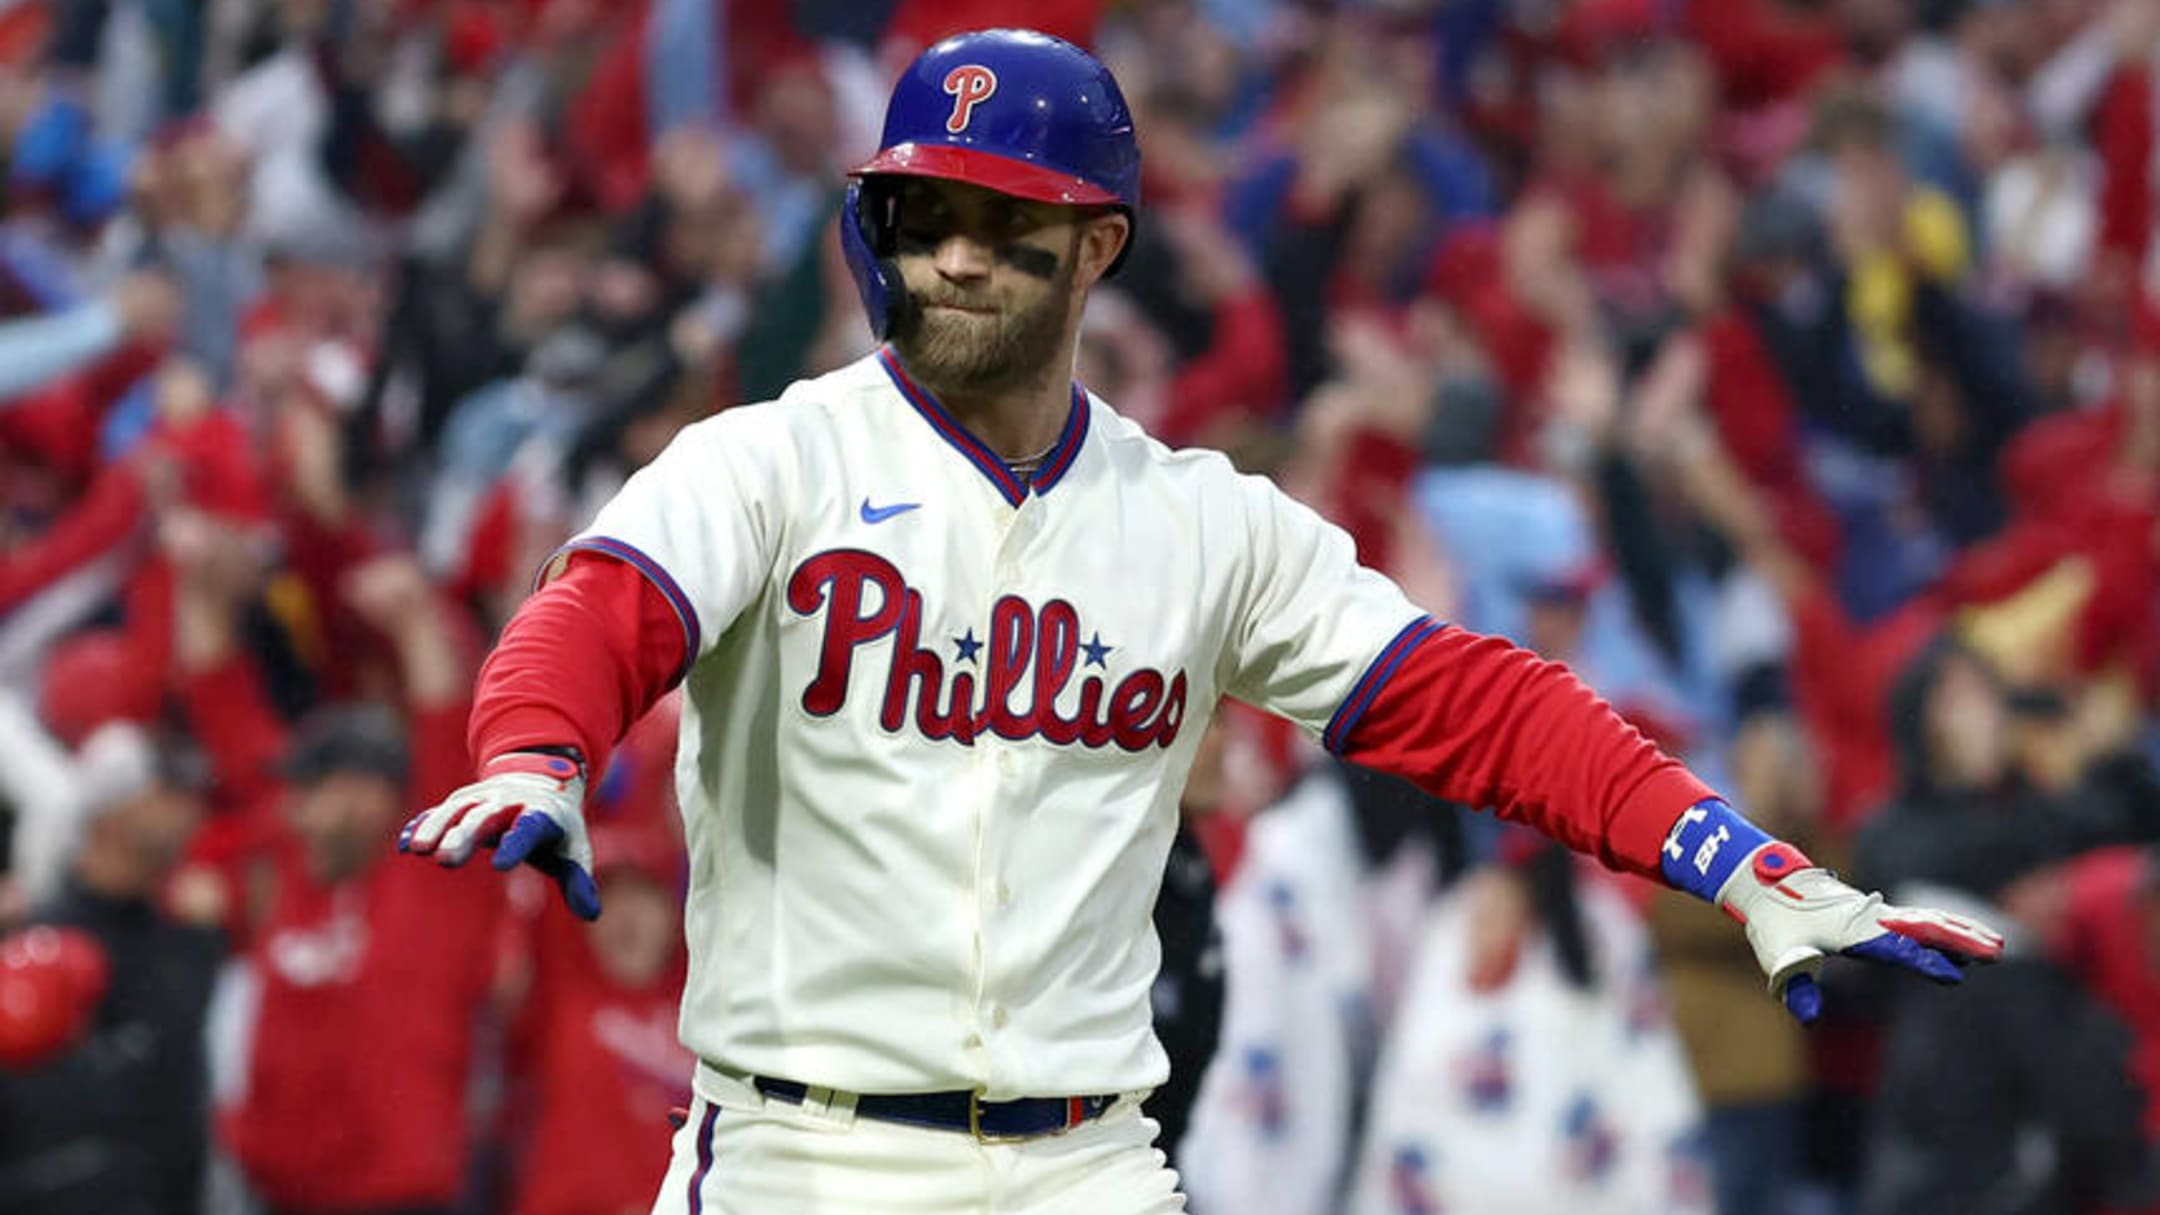 Sports world reacts to Phillies winning NL pennant